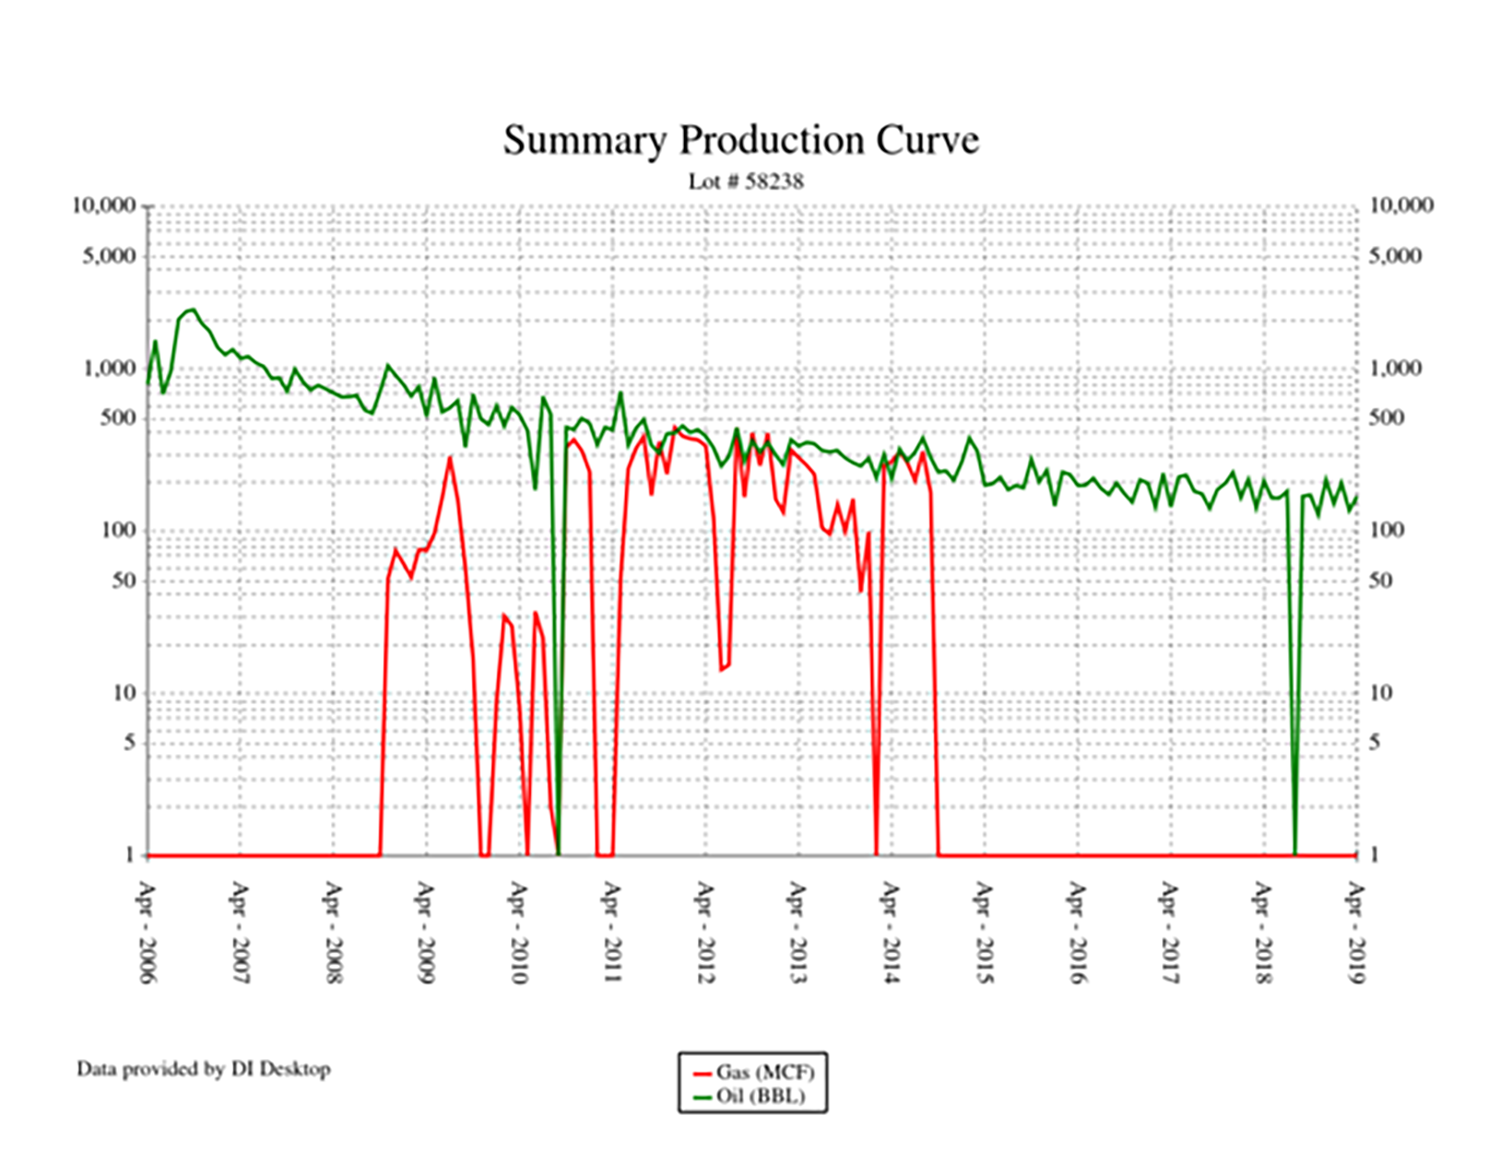 EverQuest Energy New Mexico Permian Production Curve, Five Well Package (Source: EnergyNet)